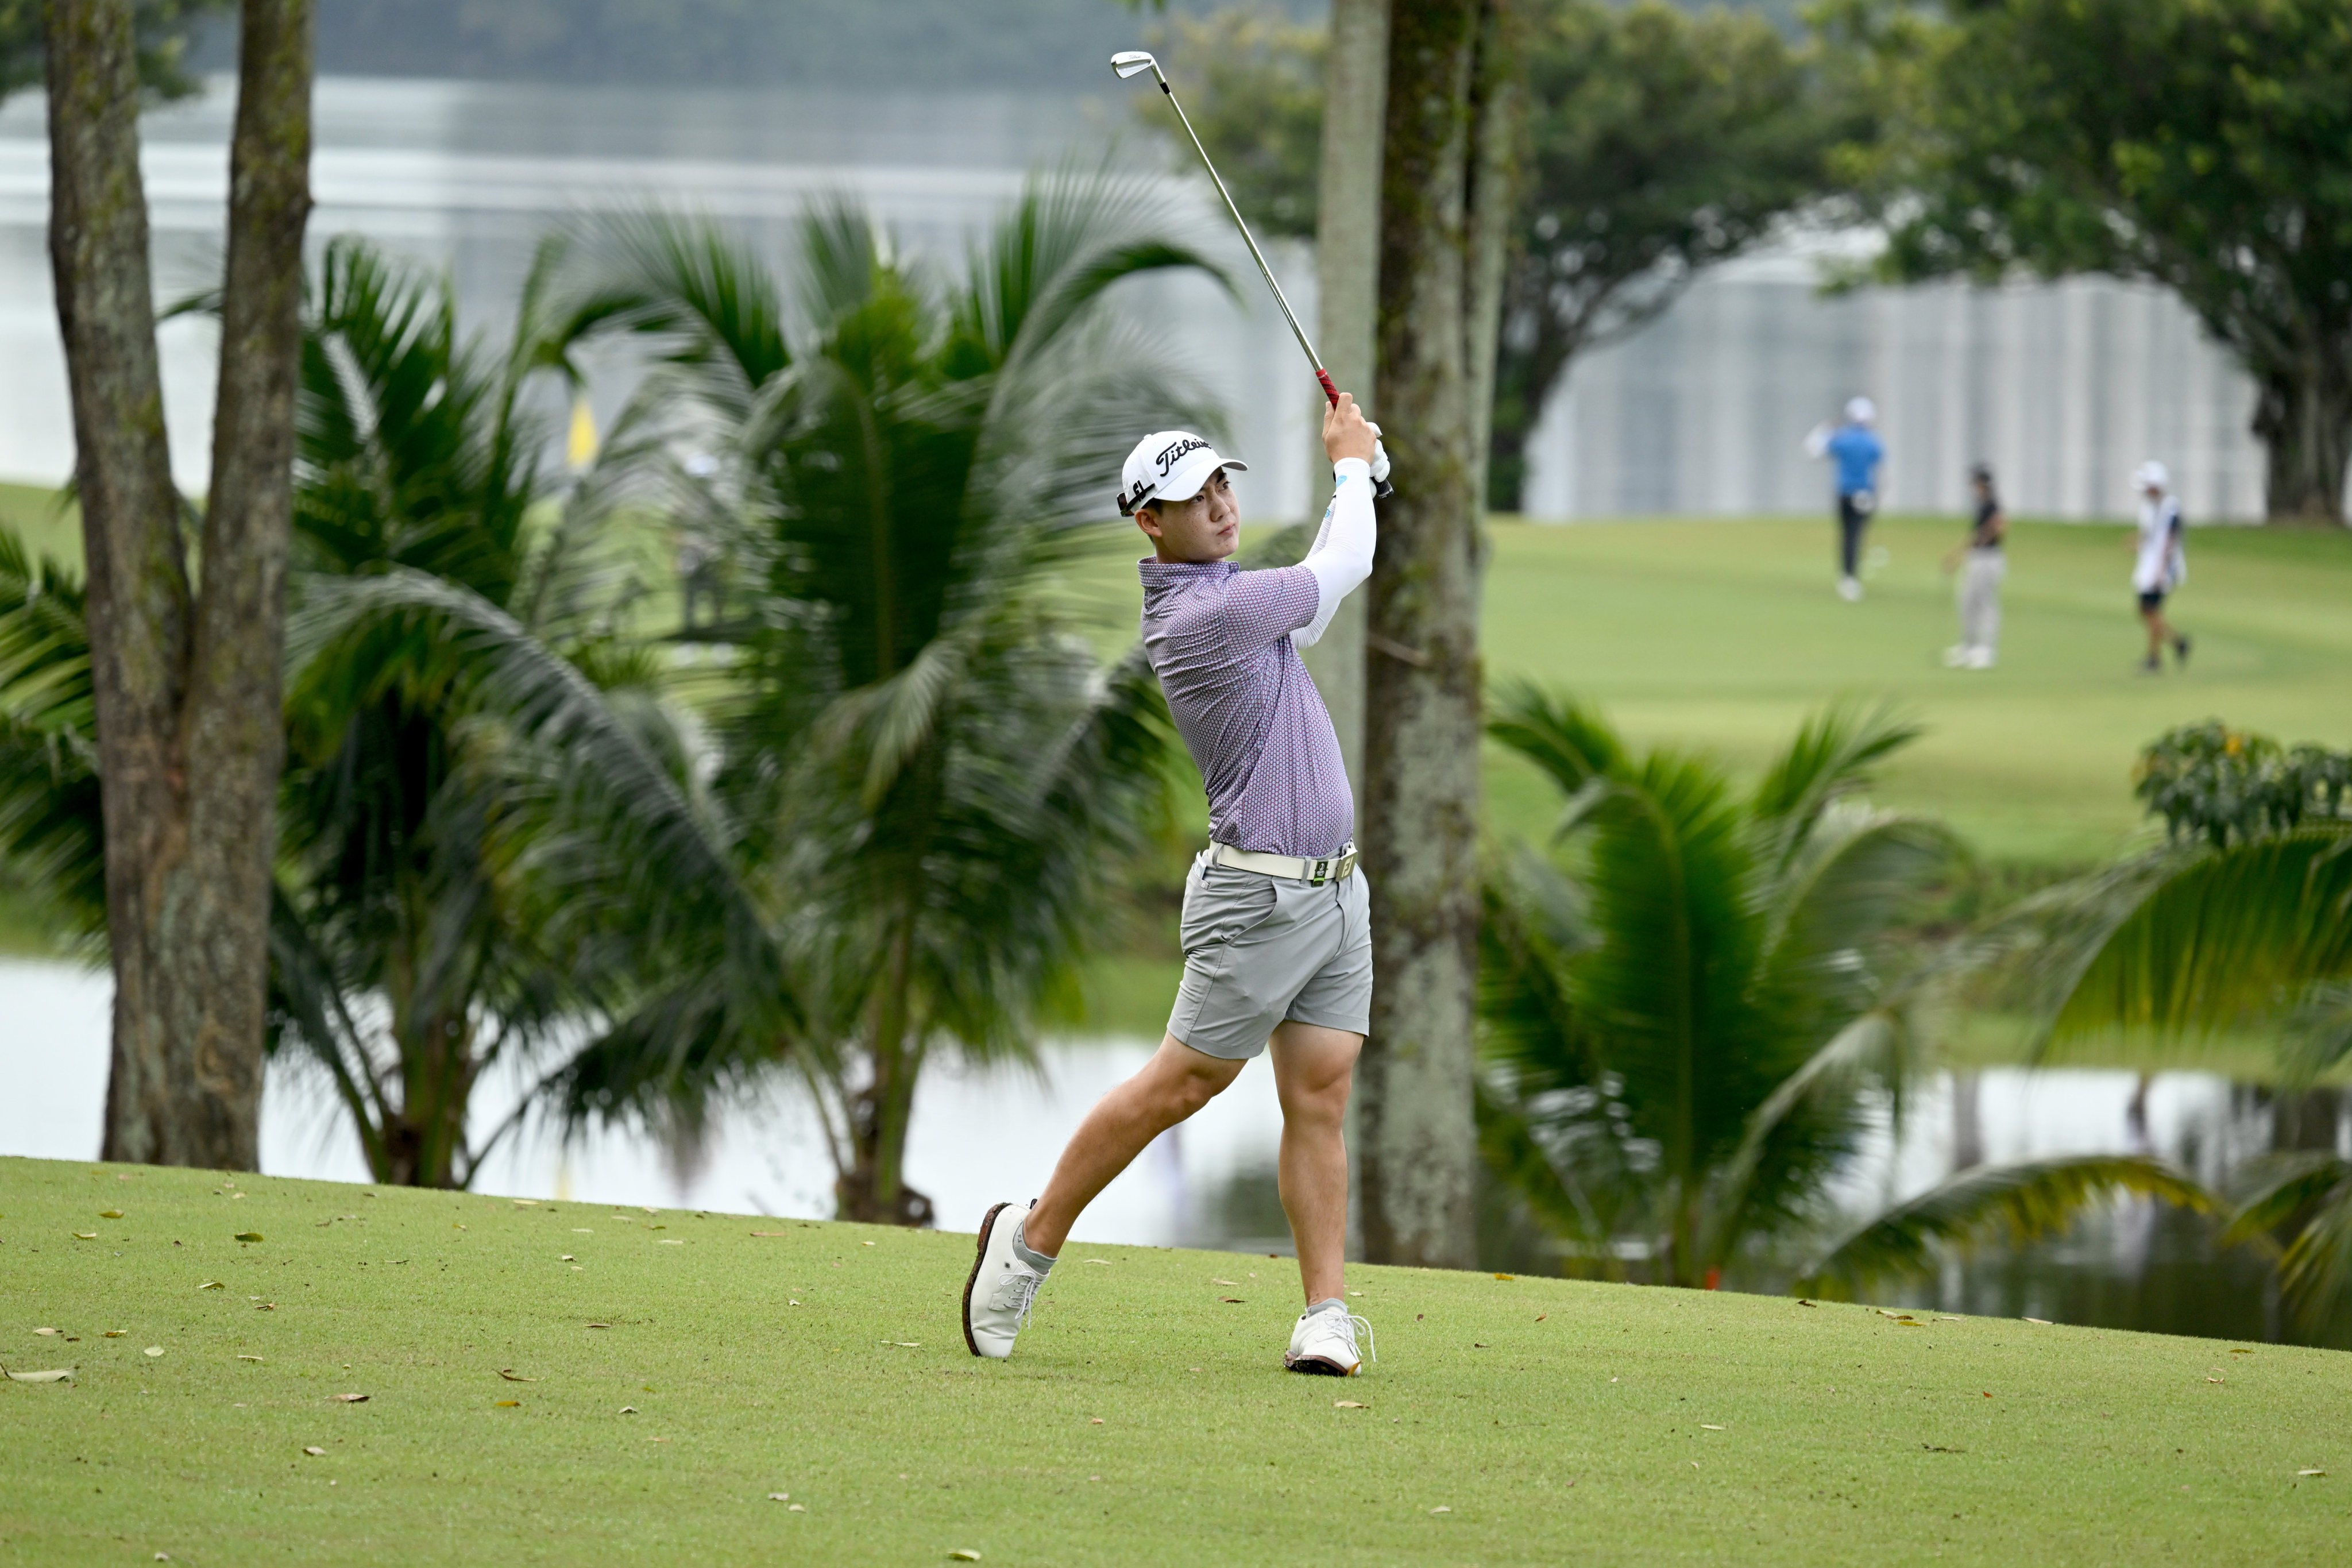 Jazz Janewattananond in action during the first round of the IRS Prima Malaysian Open at The Mines Resort & Golf Club. Photo: Asian Tour.